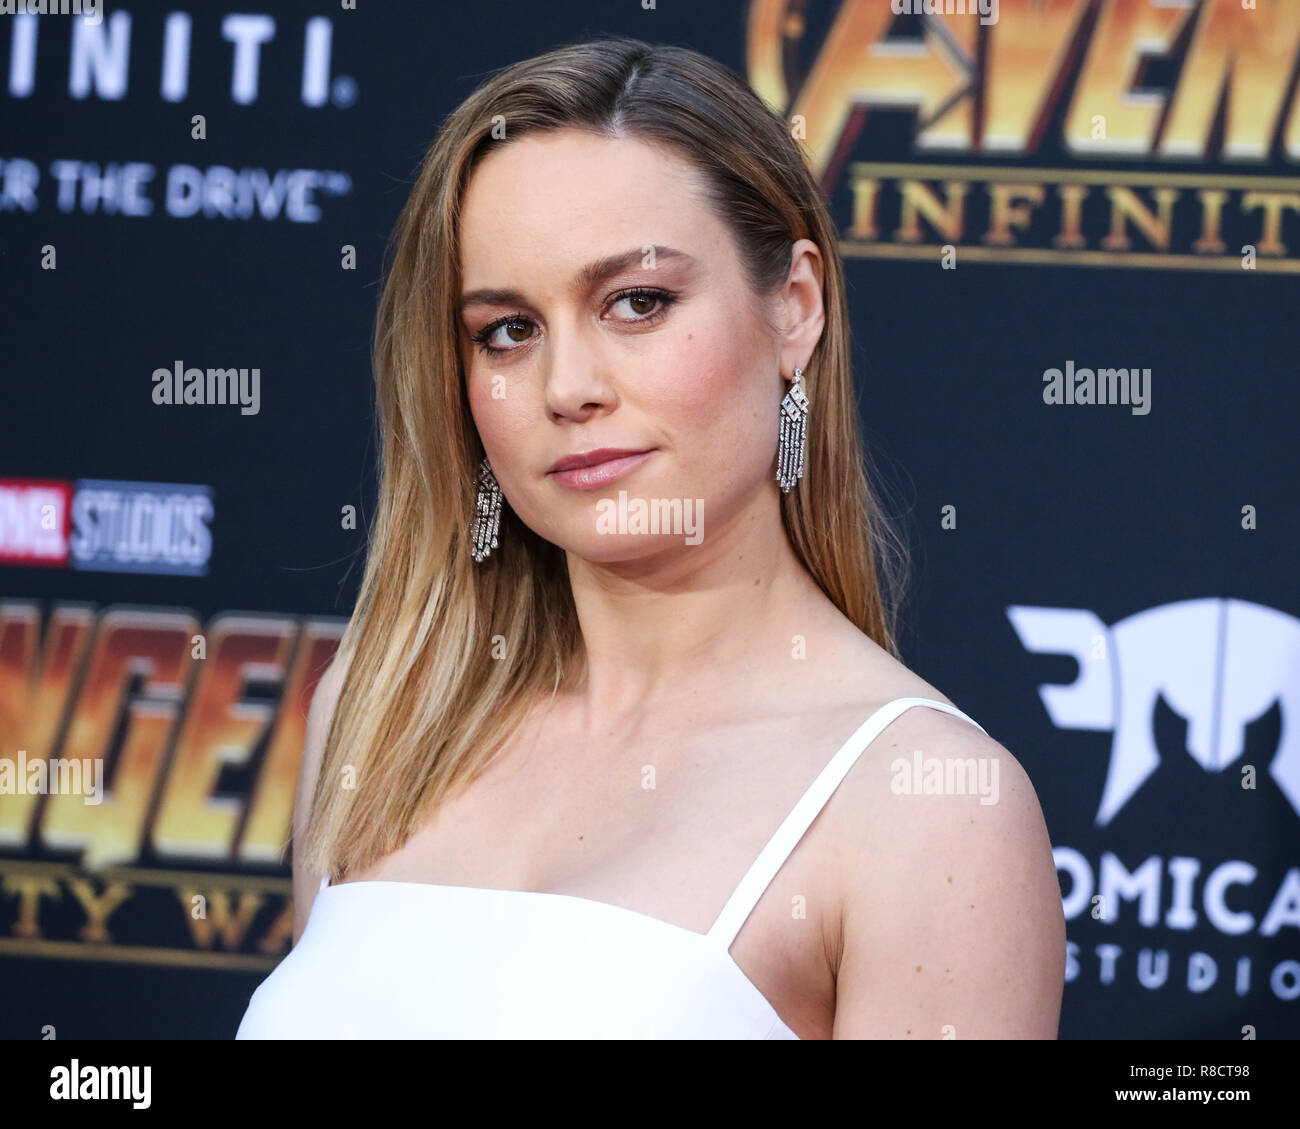 HOLLYWOOD, LOS ANGELES, CA, USA - APRIL 23: Brie Larson at the World Premiere Of Disney And Marvel's 'Avengers: Infinity War' held at the El Capitan Theatre, Dolby Theatre and TCL Chinese Theatre IMAX on April 23, 2018 in Hollywood, Los Angeles, California, United States. (Photo by Xavier Collin/Image Press Agency) Stock Photo